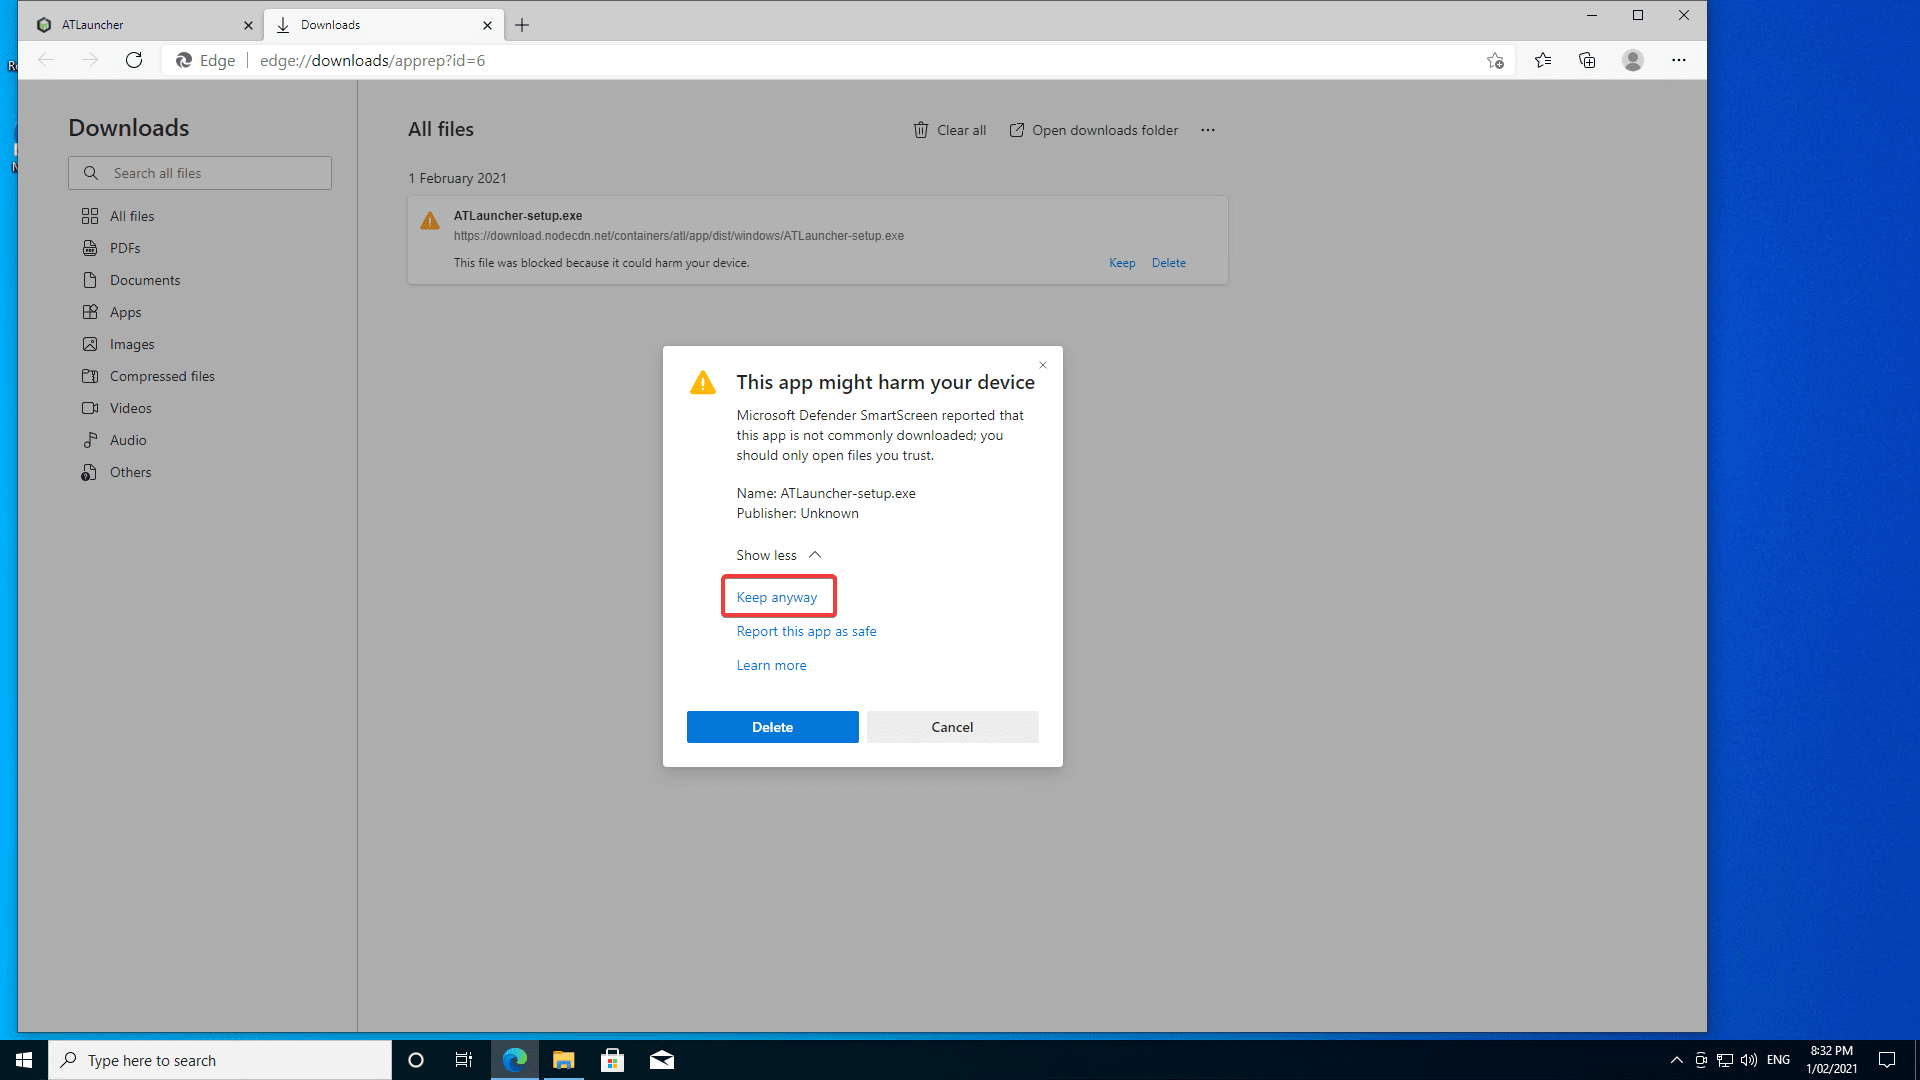 How to allow the download through Edge 2